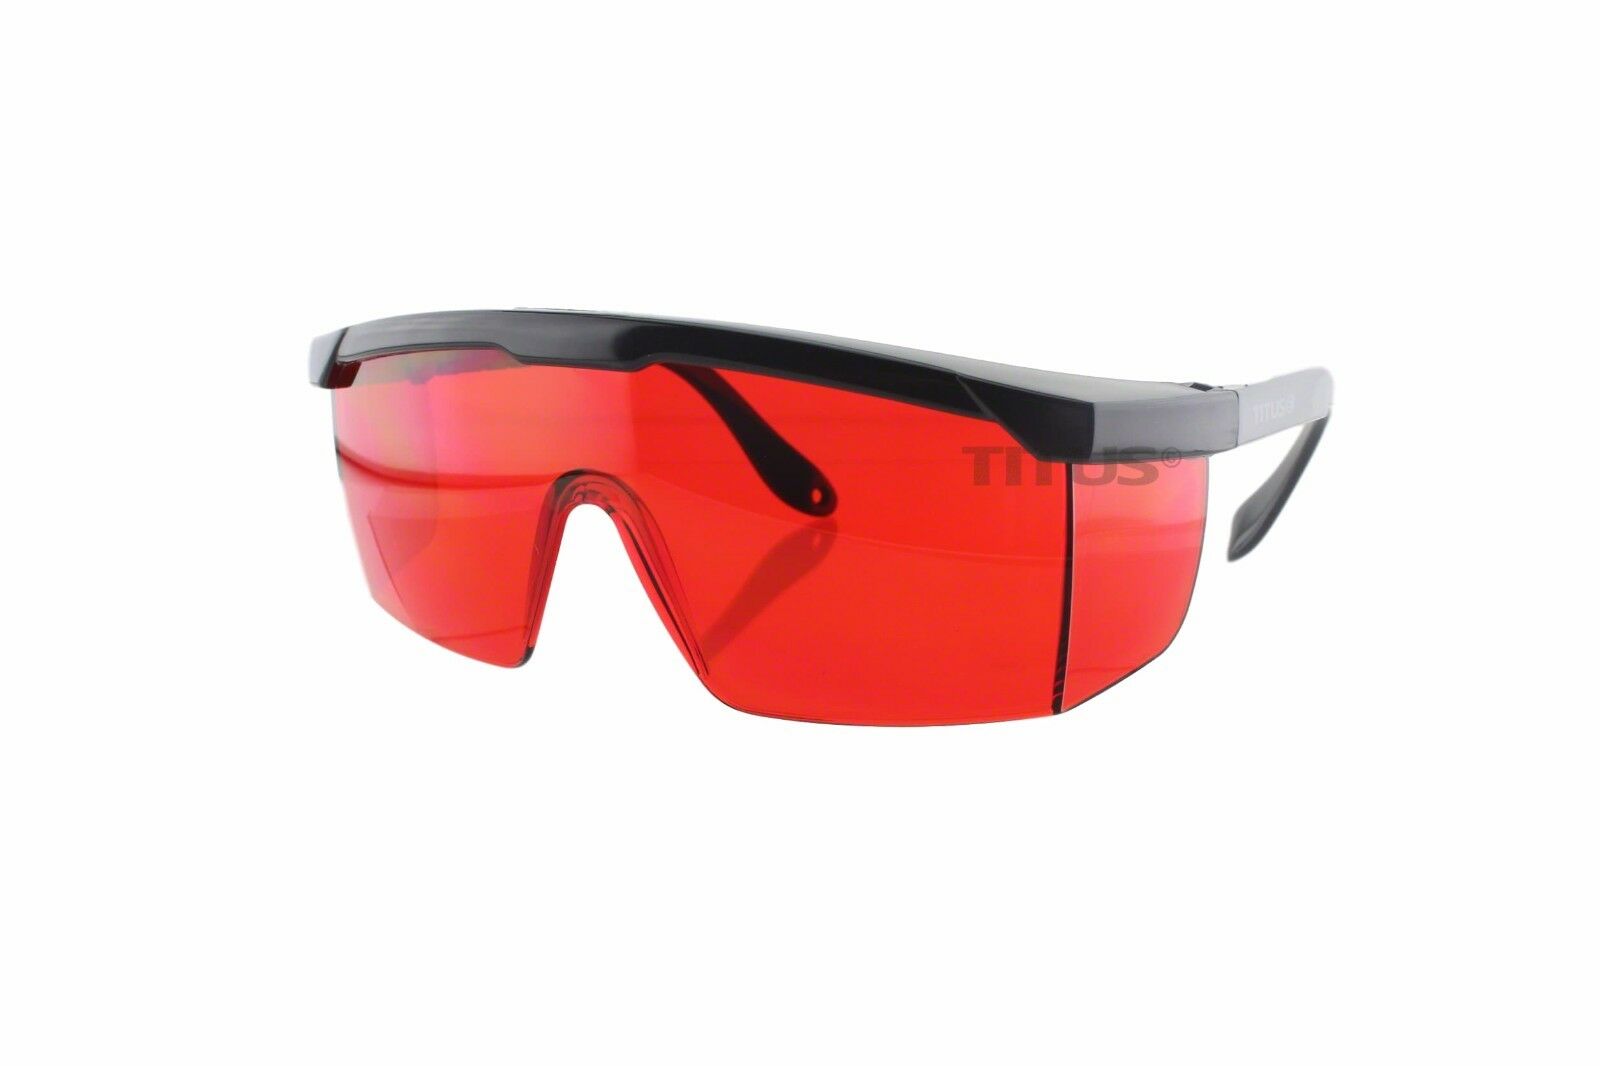 Titus Lg-red Wrap-around Laser Safety Glasses